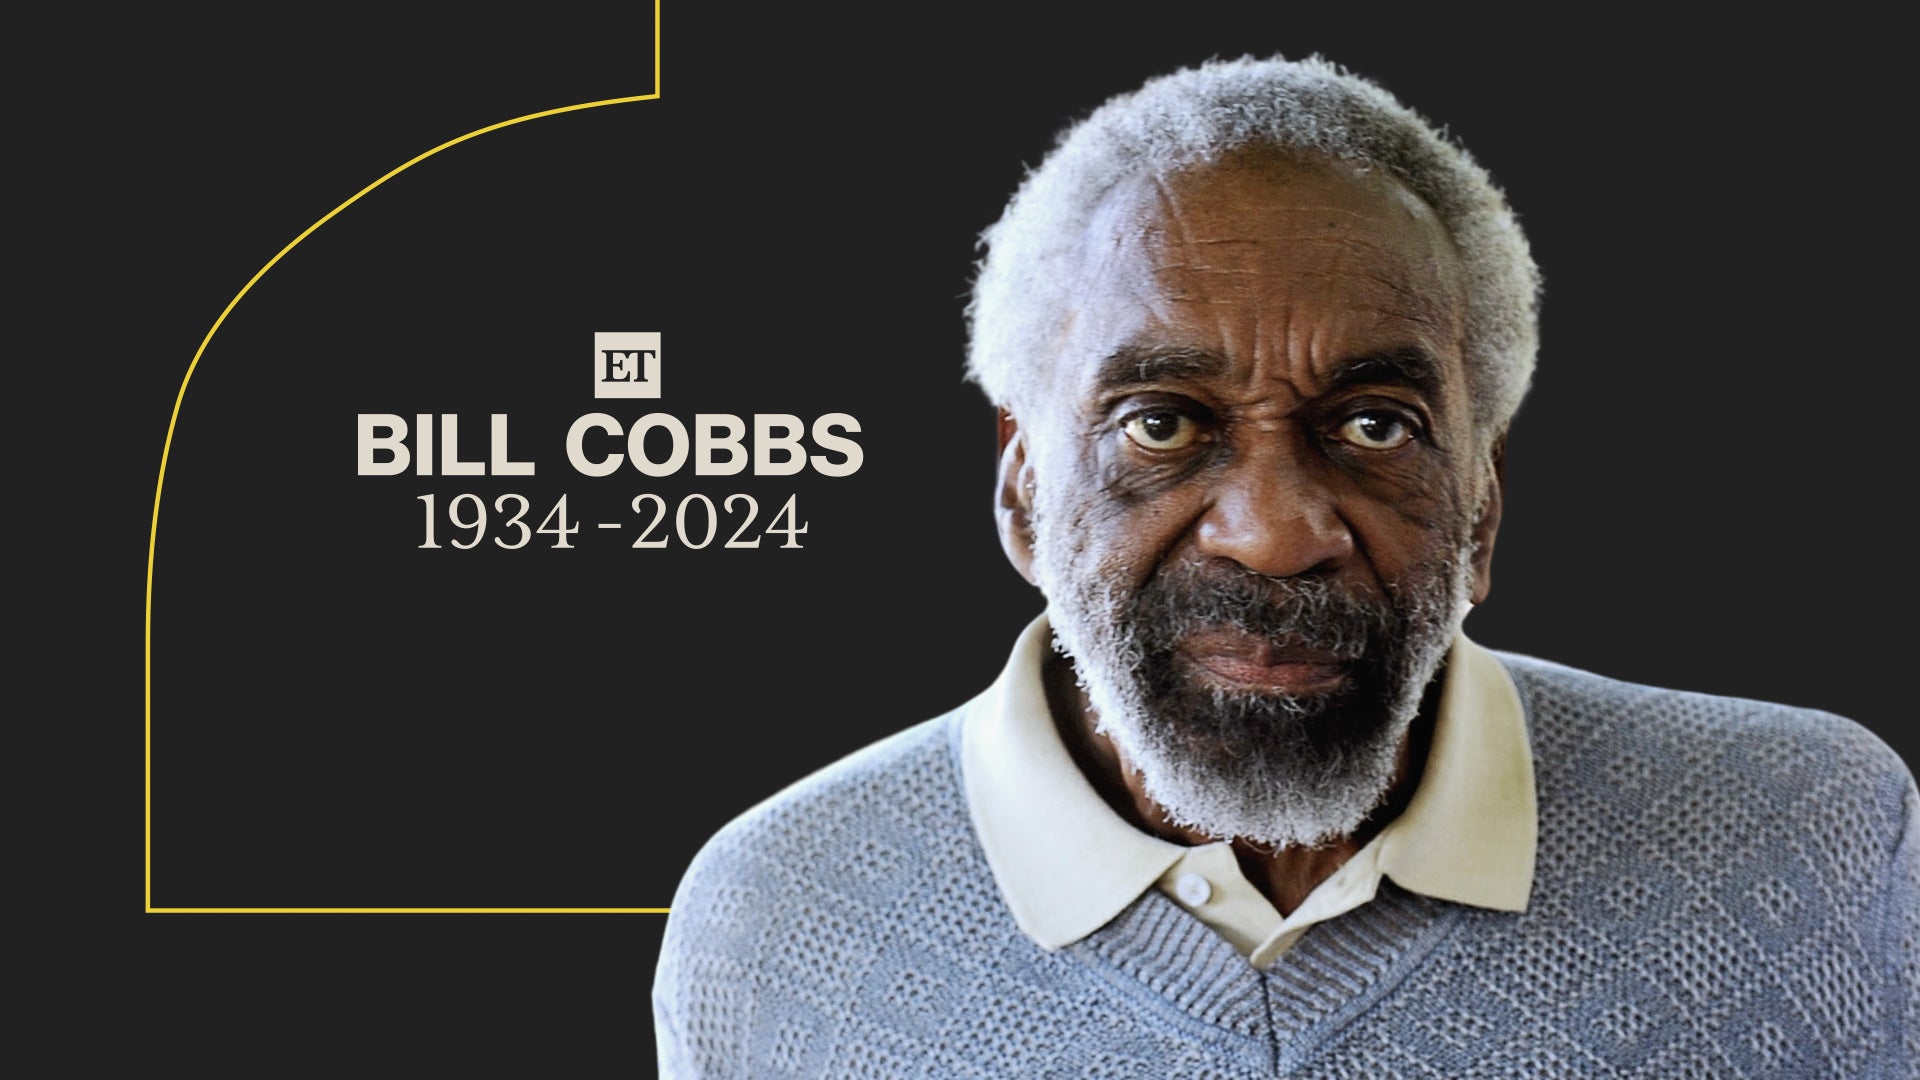 Bill Cobbs, ‘The Bodyguard’ and 'Air Bud' Actor, Dead at 90